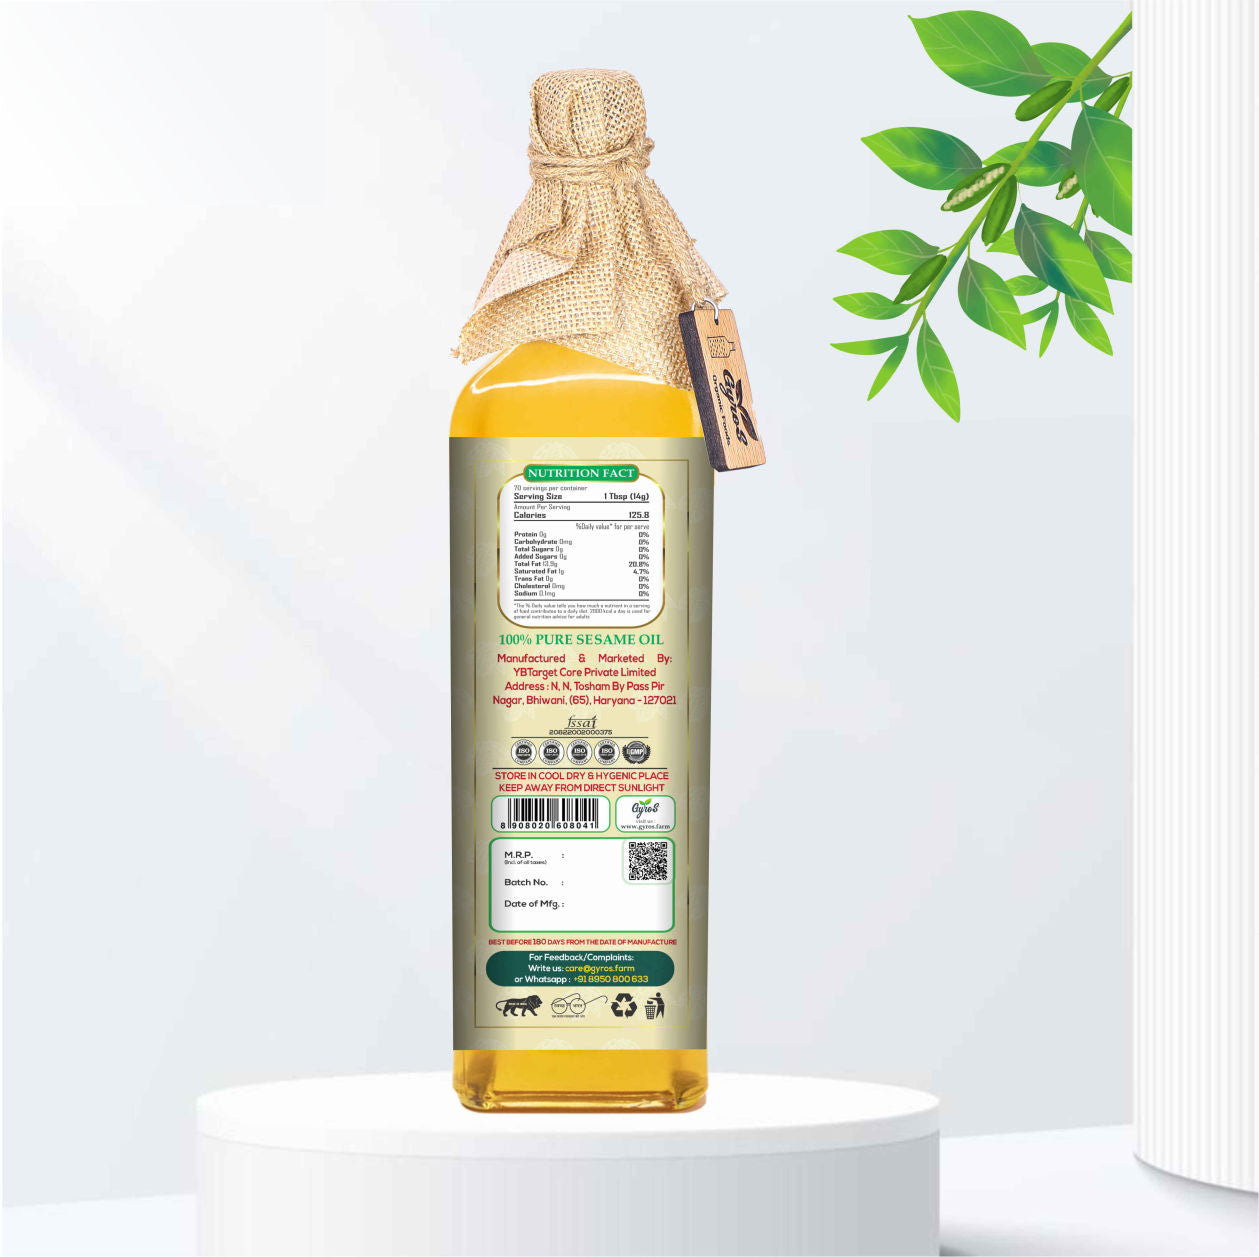 new packaging of gyros wood pressed cold sesame oil